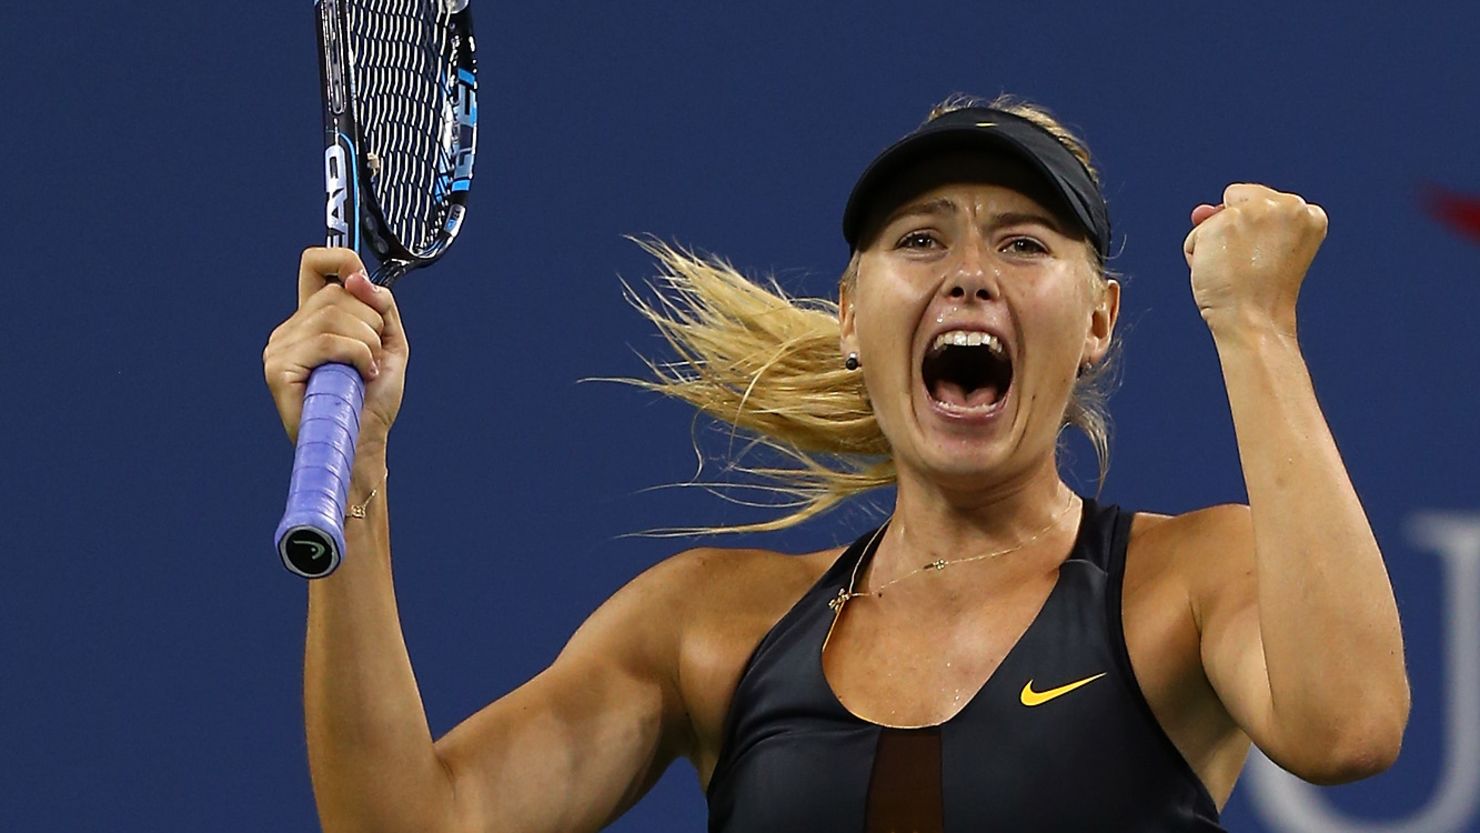 Sharapova has won 23 out of 24 three-setters since the start of 2011.